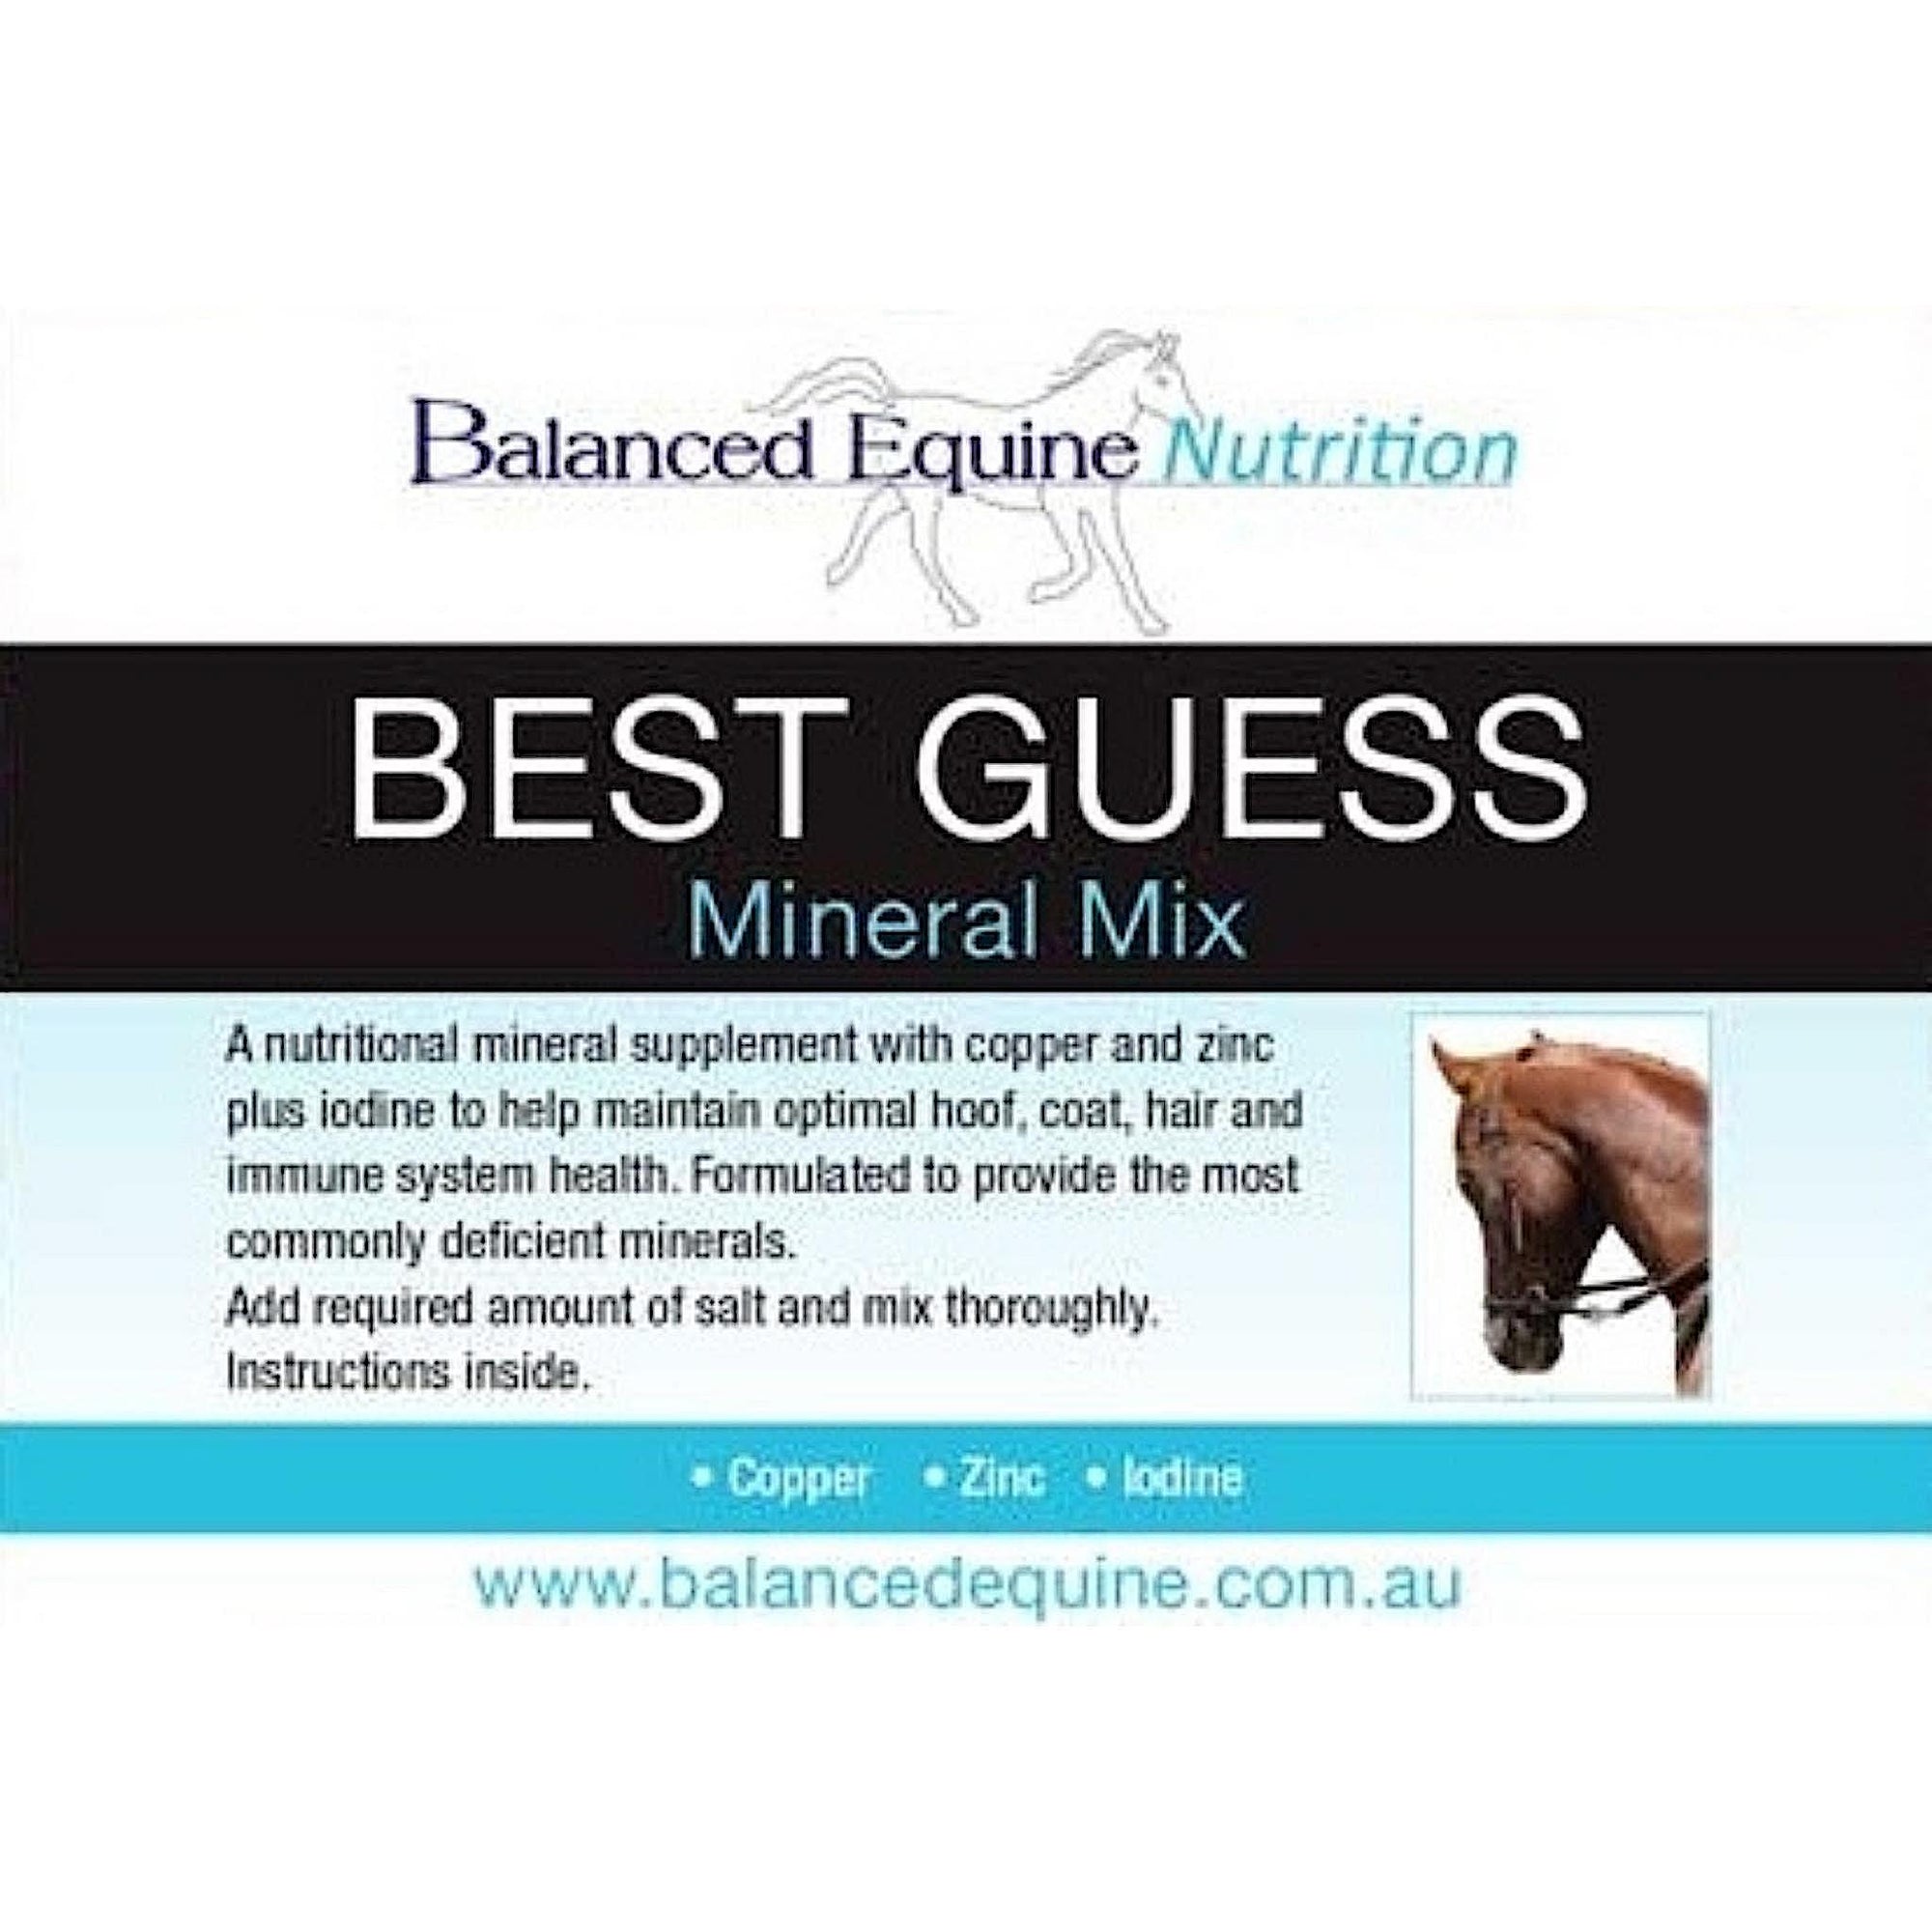 Packaging titled "Best Guess - Mineral Mix" with description of product.